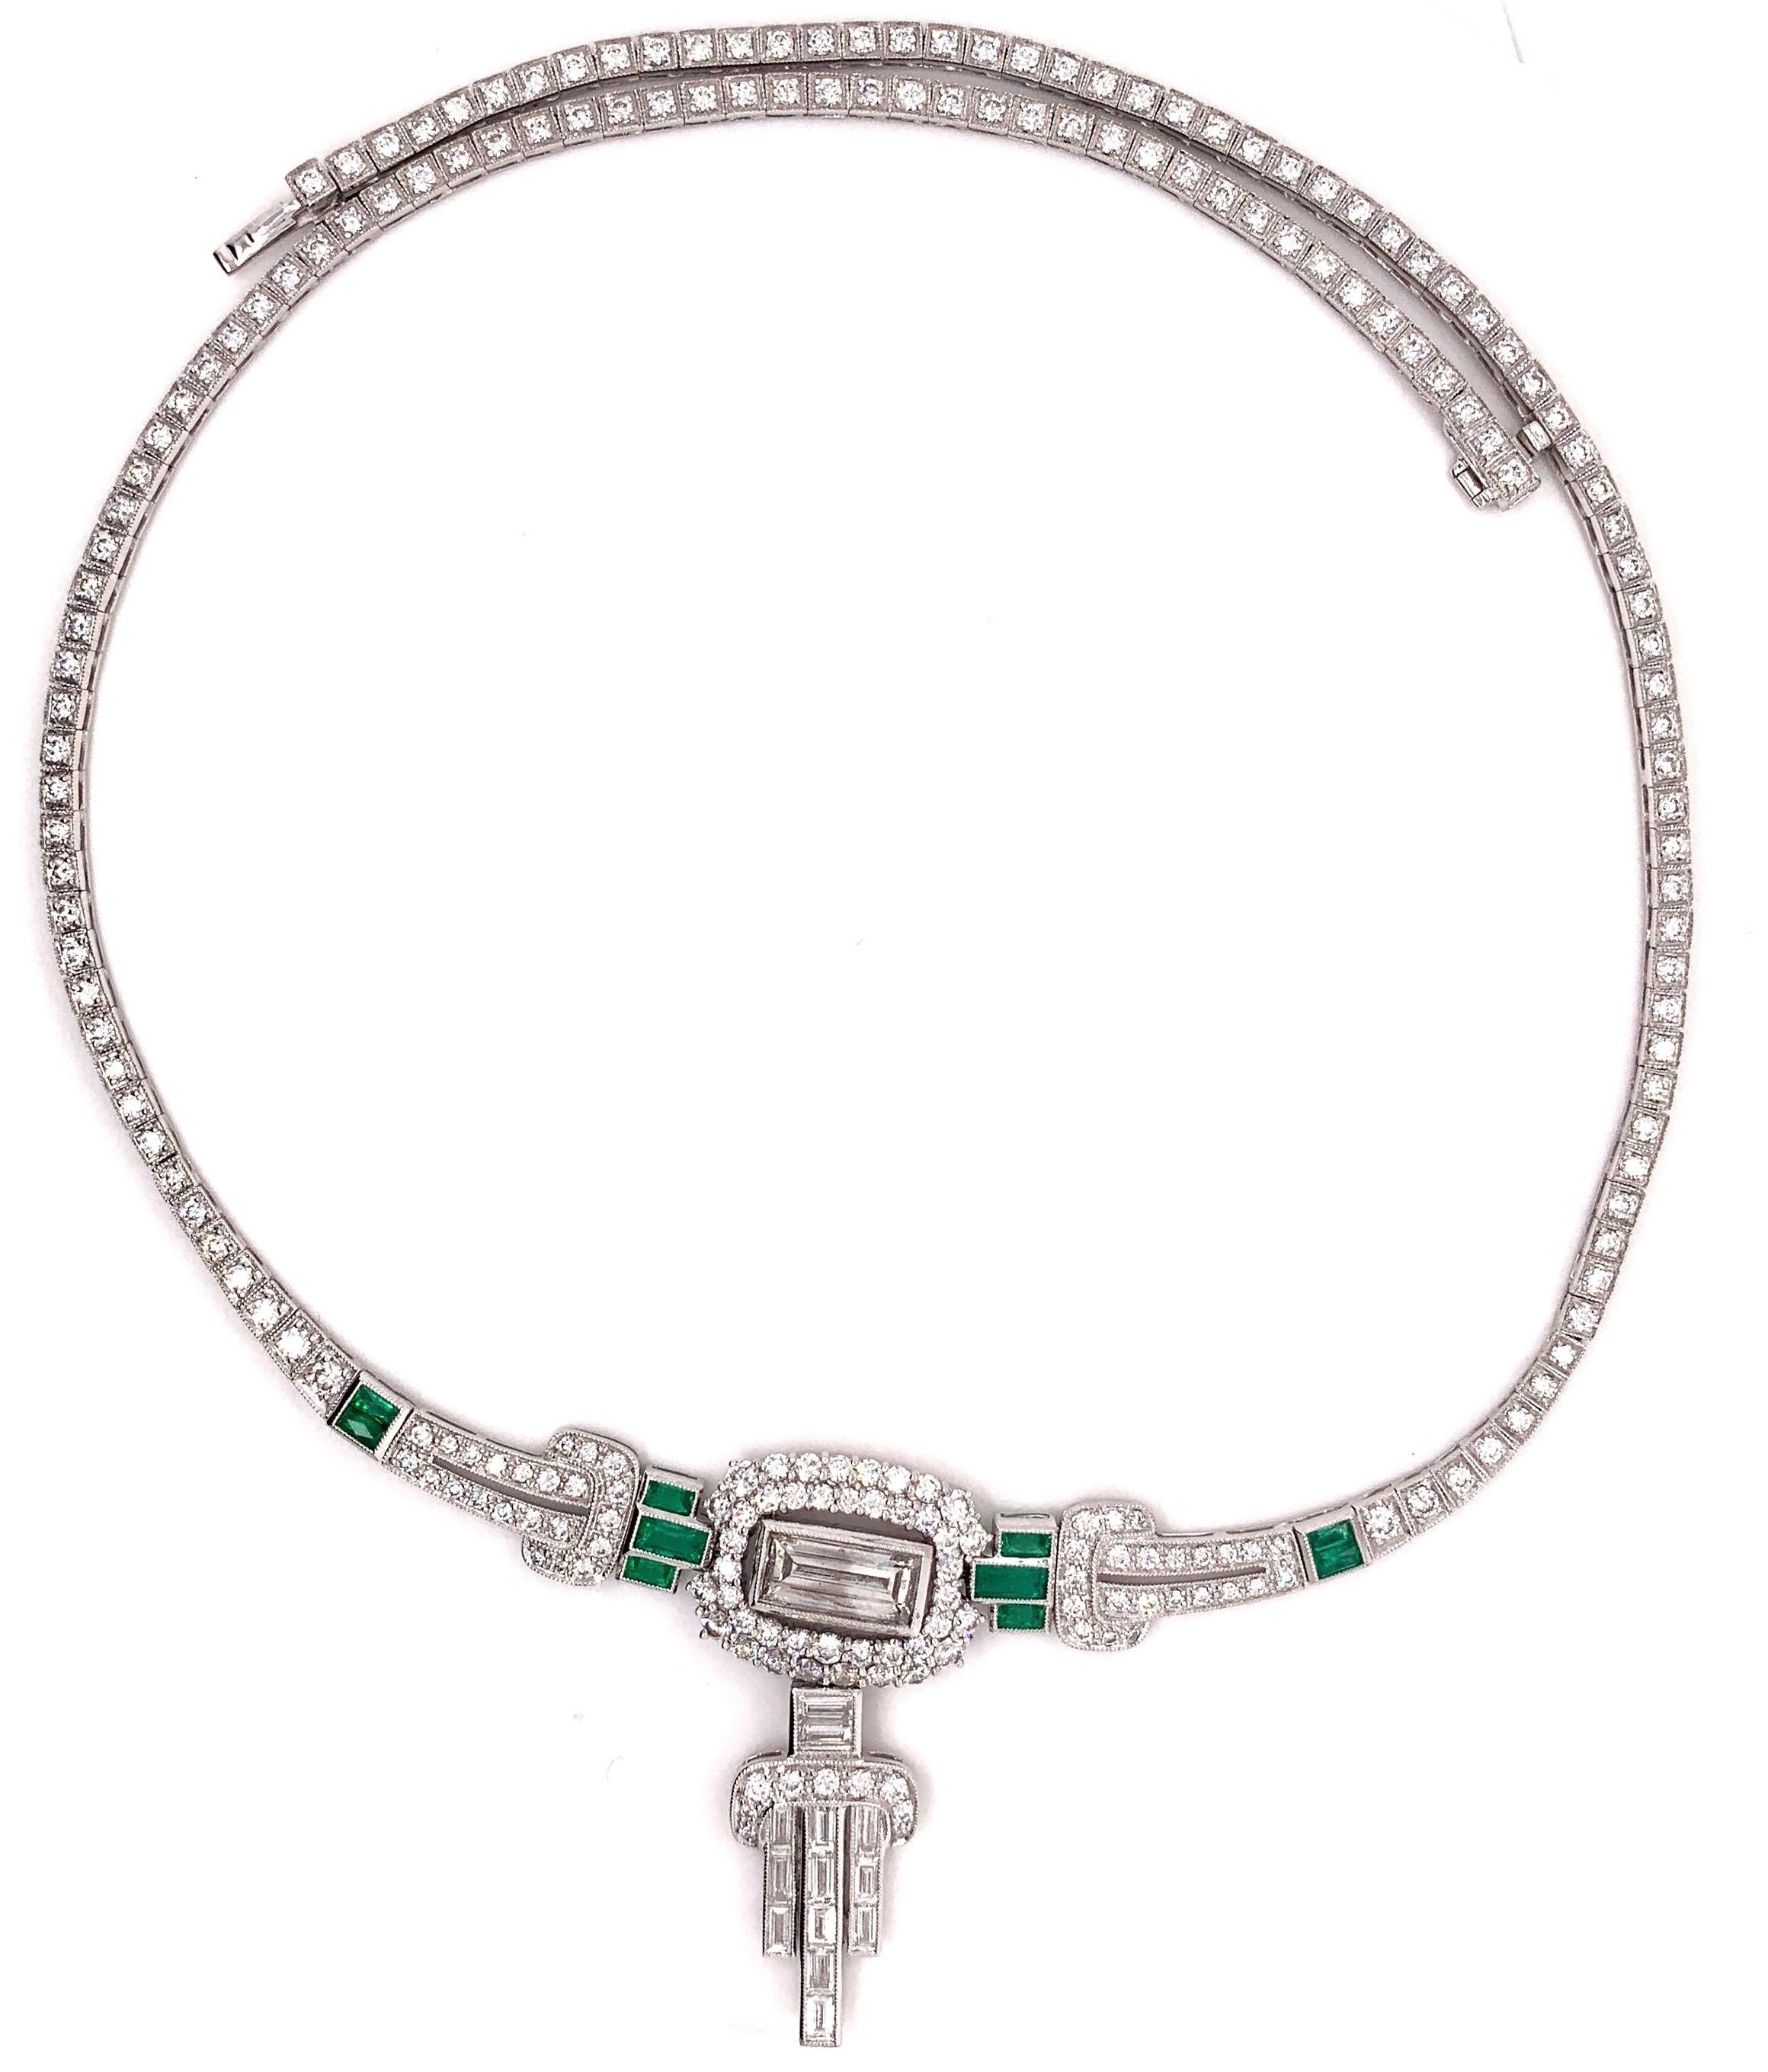 Platinum necklace that showcases emerald stones weighing 0.90 carats spaced by 1.51 carats of baguette cut in the center, knotted with small dazzling diamonds with the total carat weight of 5.81. 

Sophia D by Joseph Dardashti LTD has been known